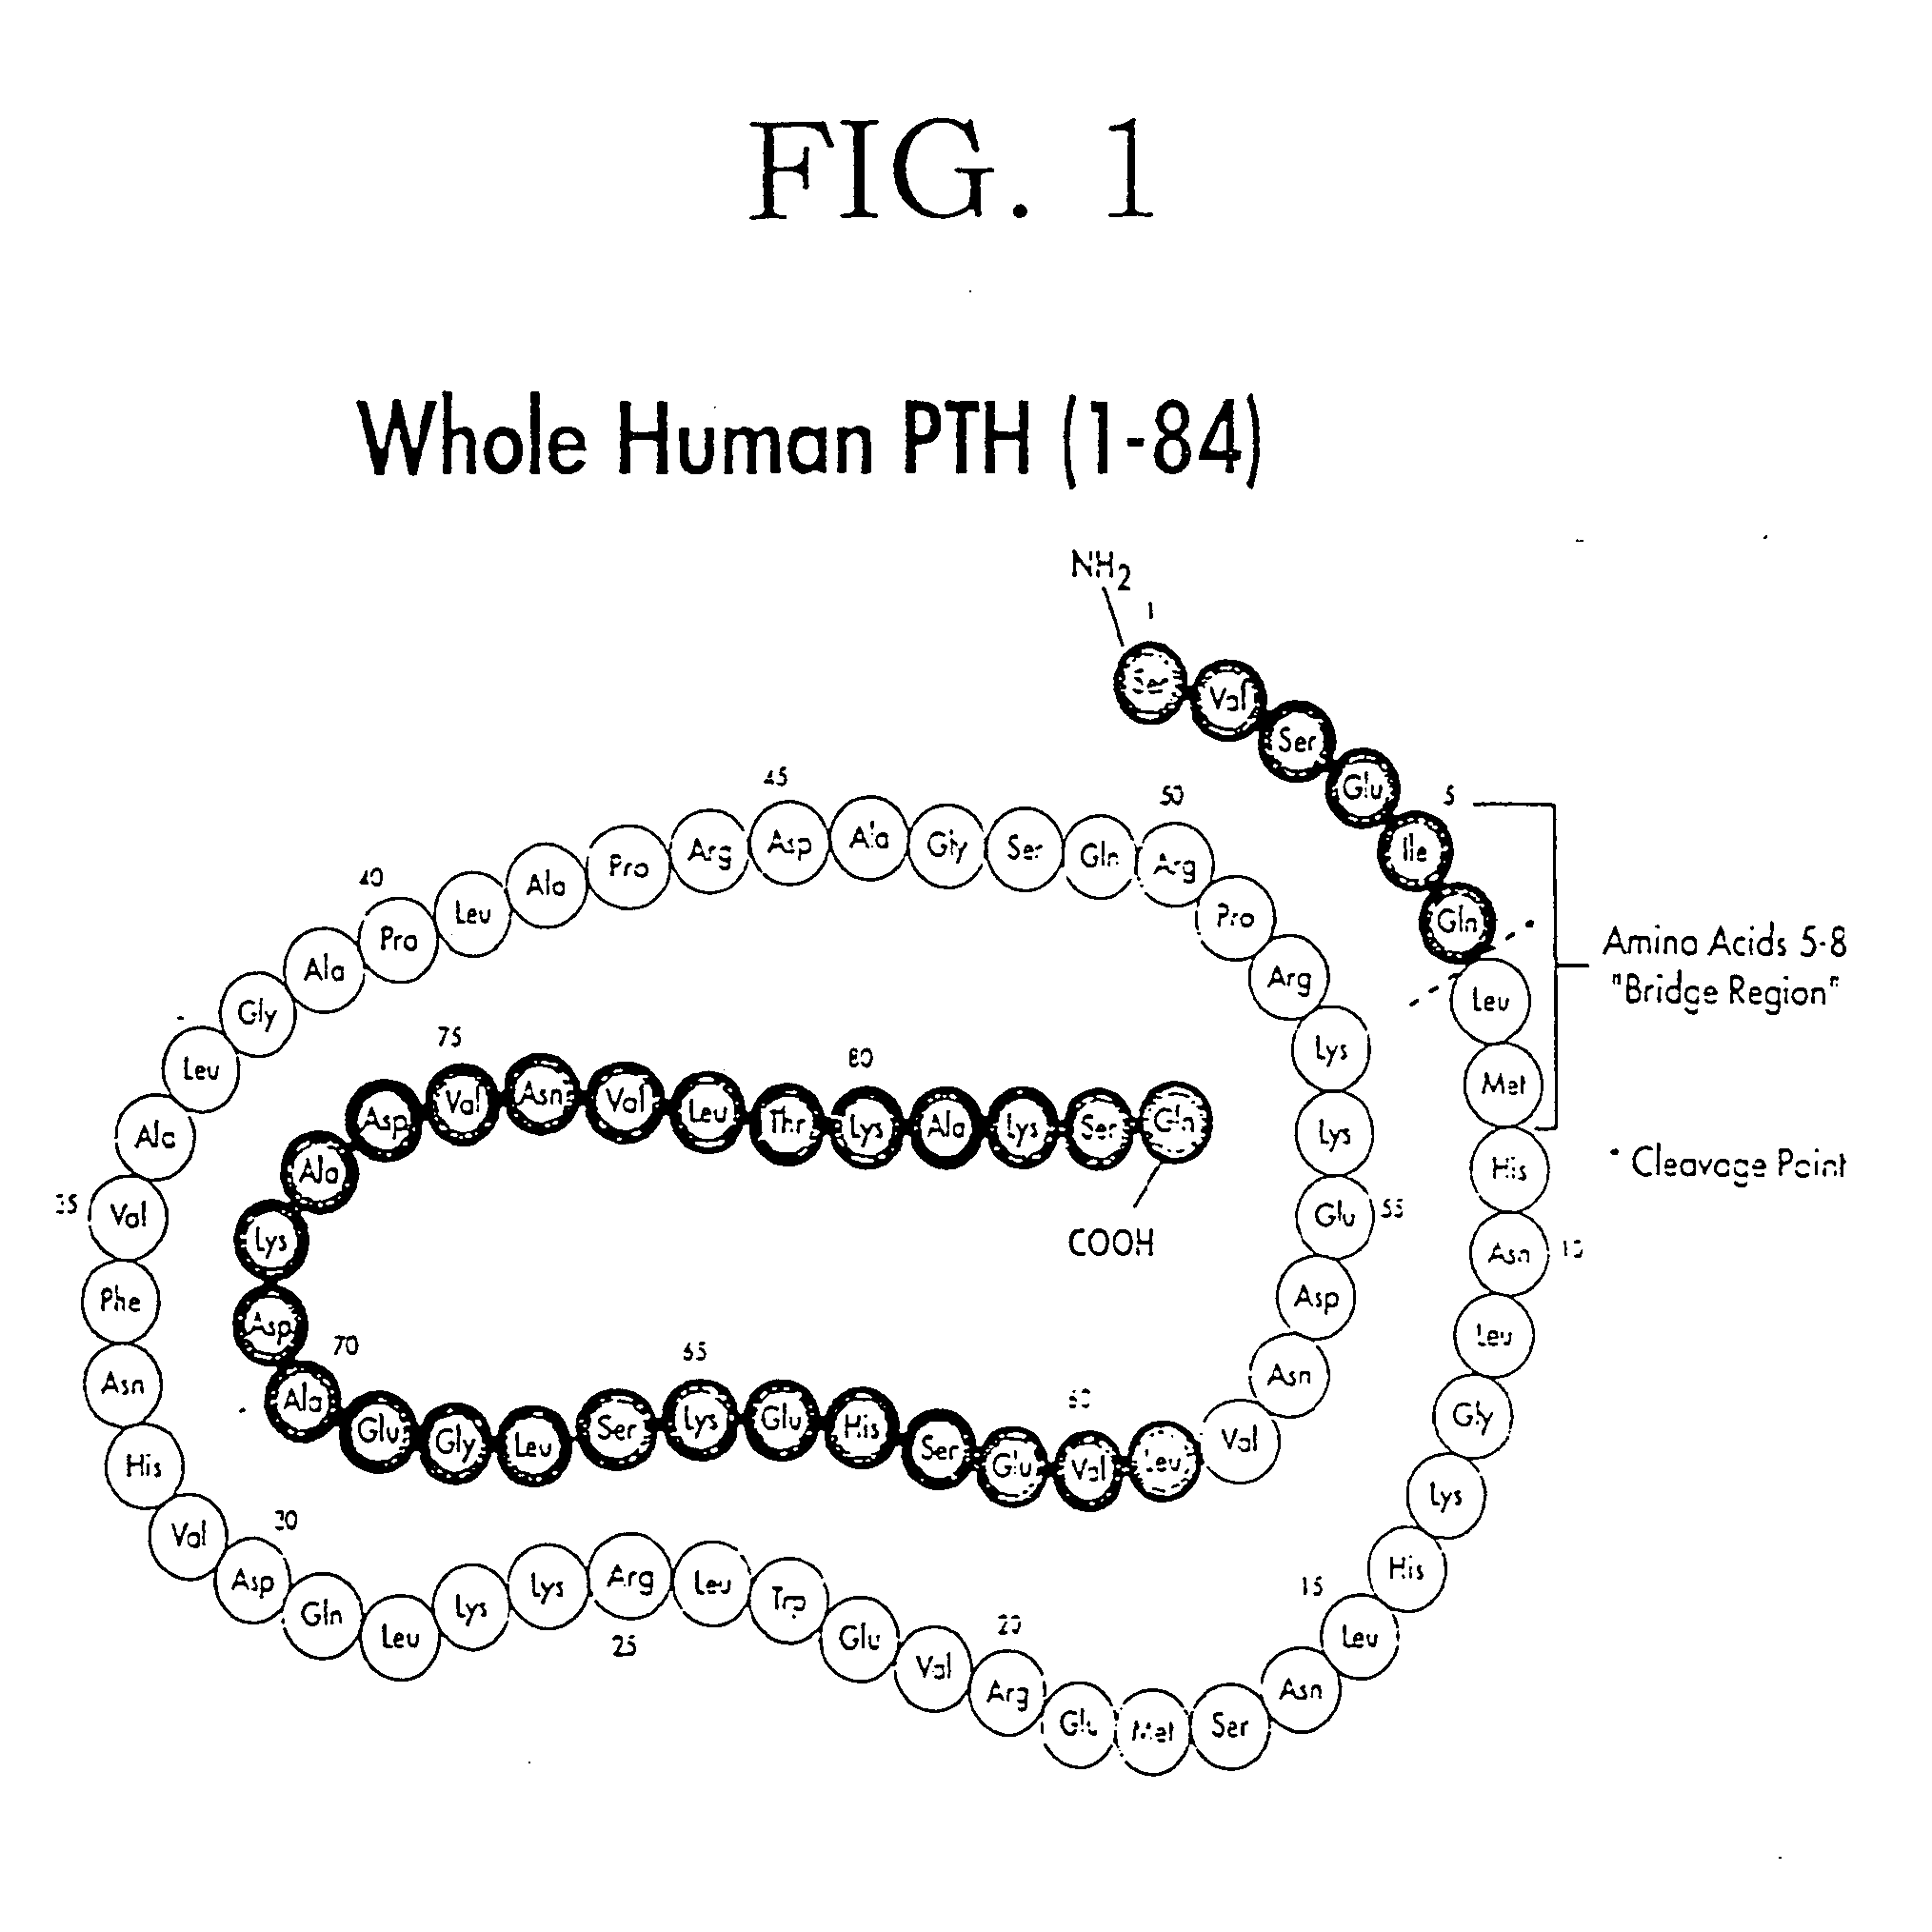 Methods, kits, and antibodies for detecting parathyroid hormone